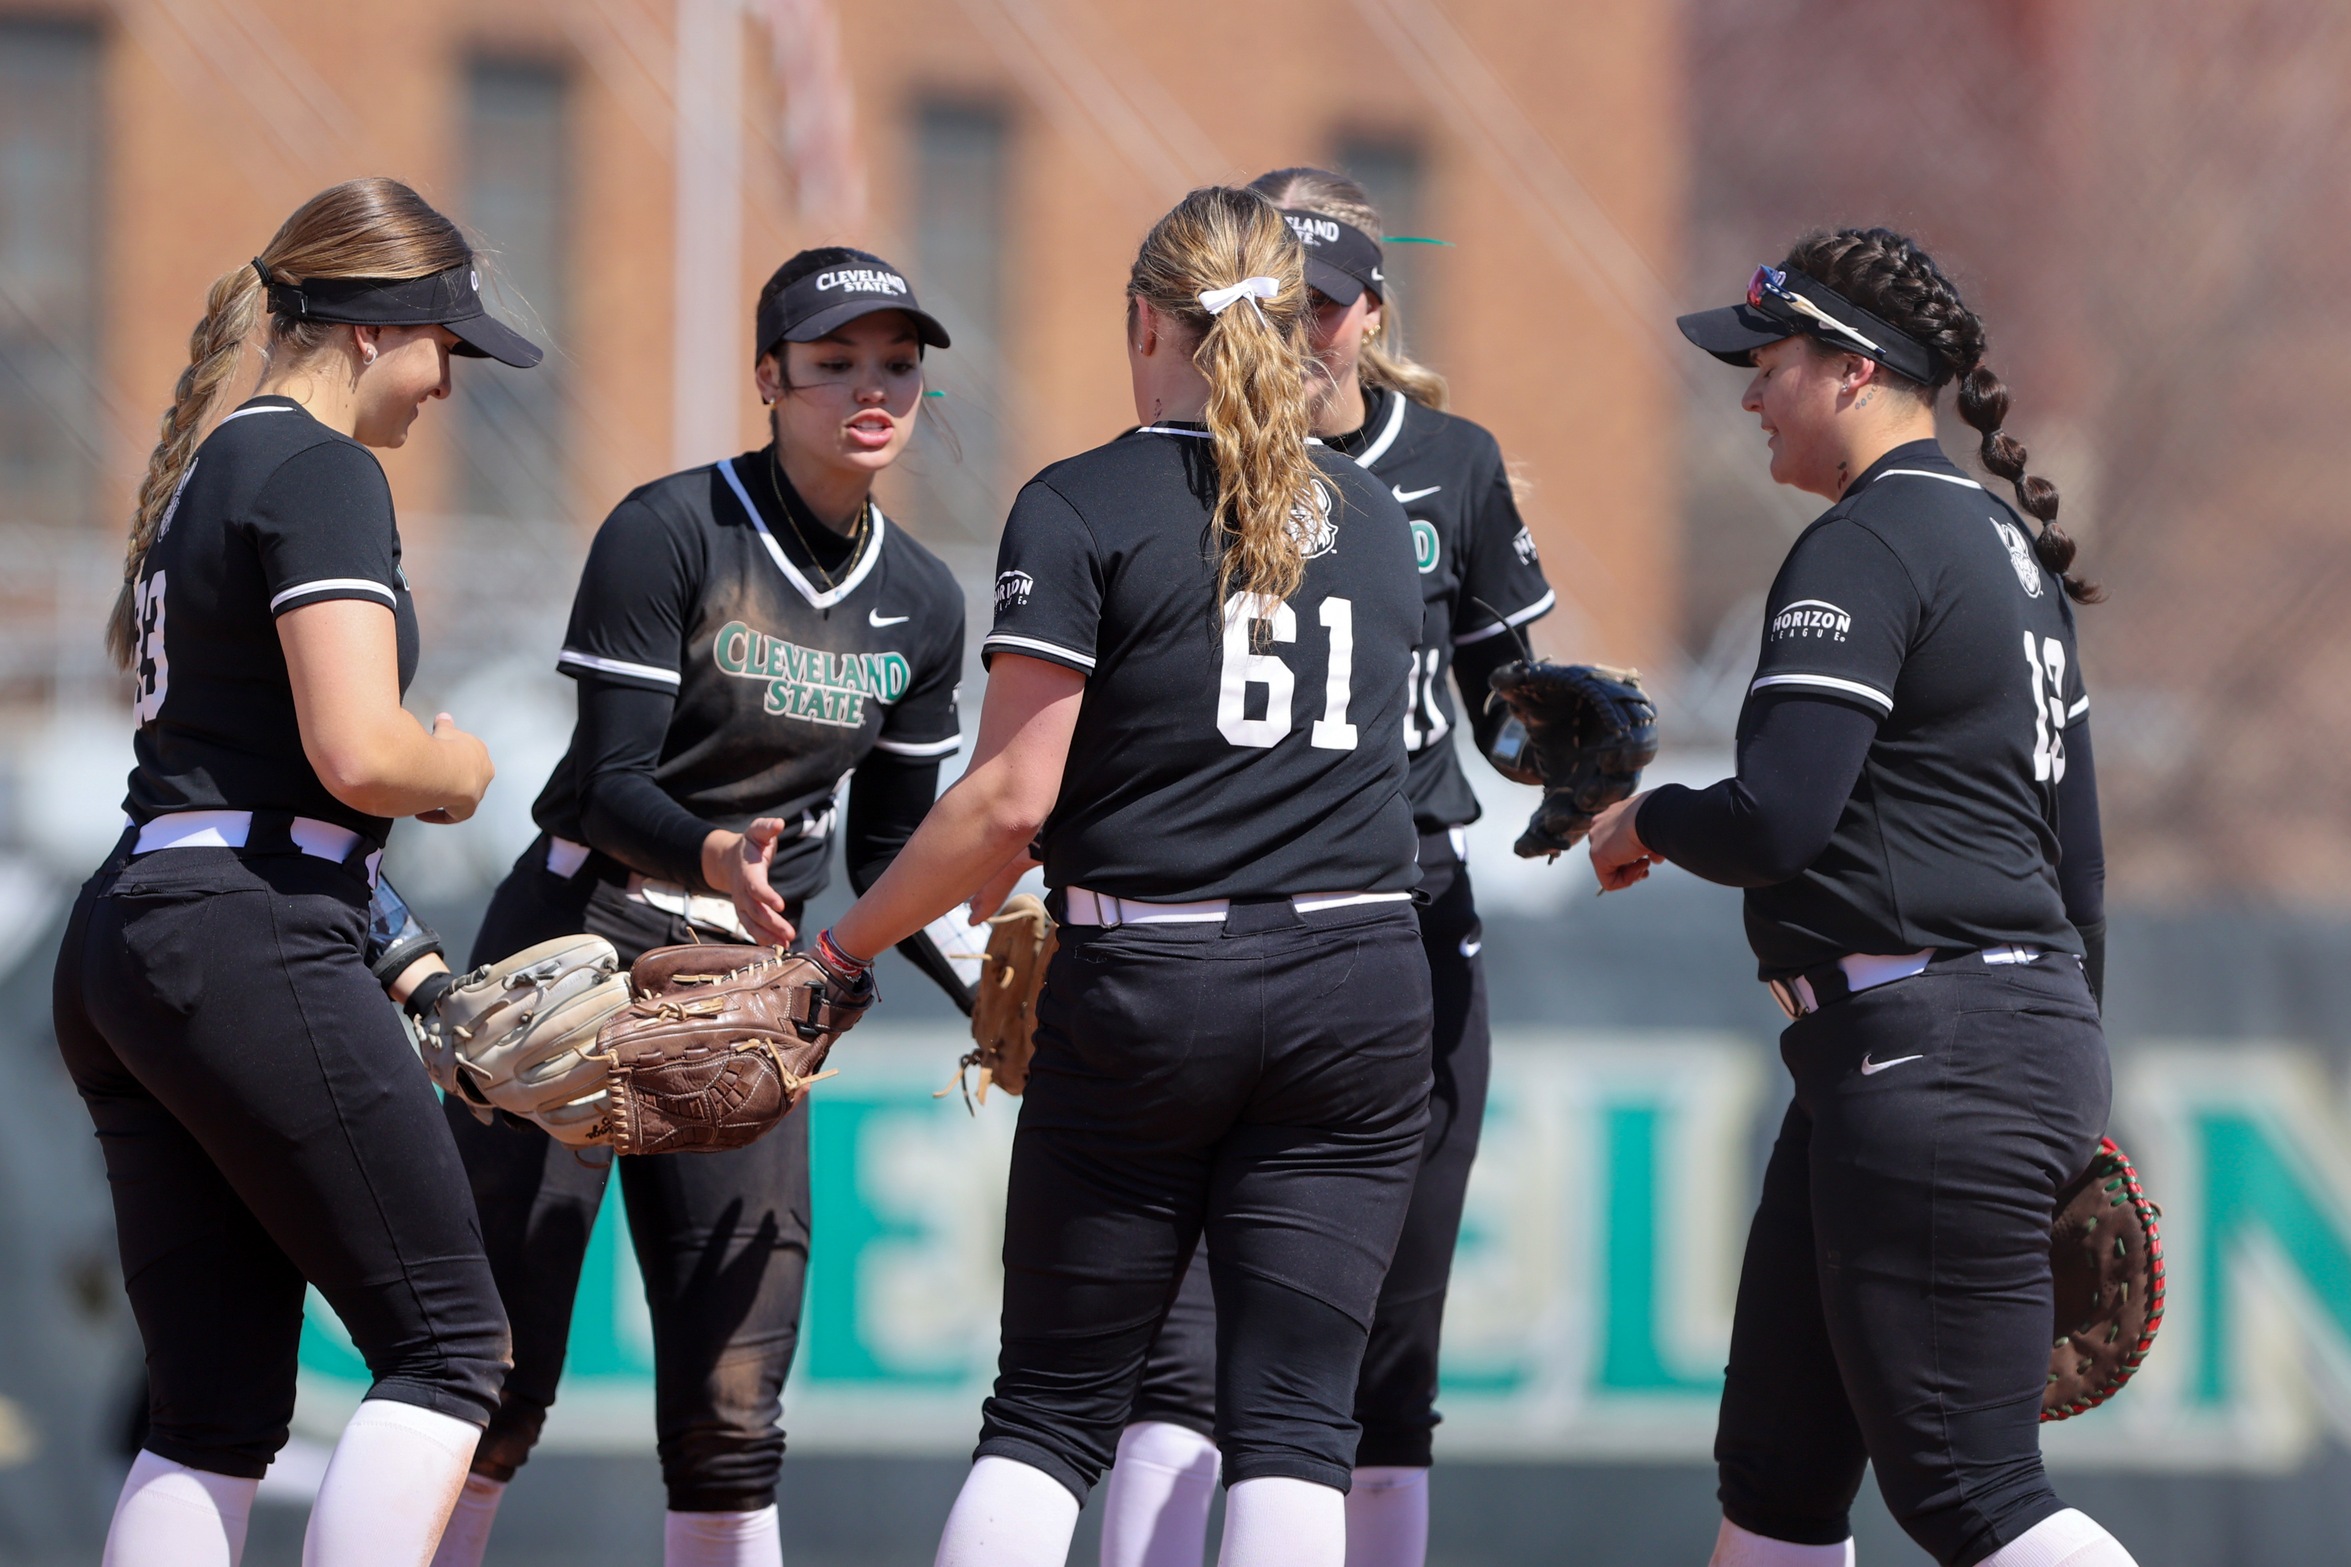 CLEVELAND STATE SOFTBALL CAMP INFORMATION